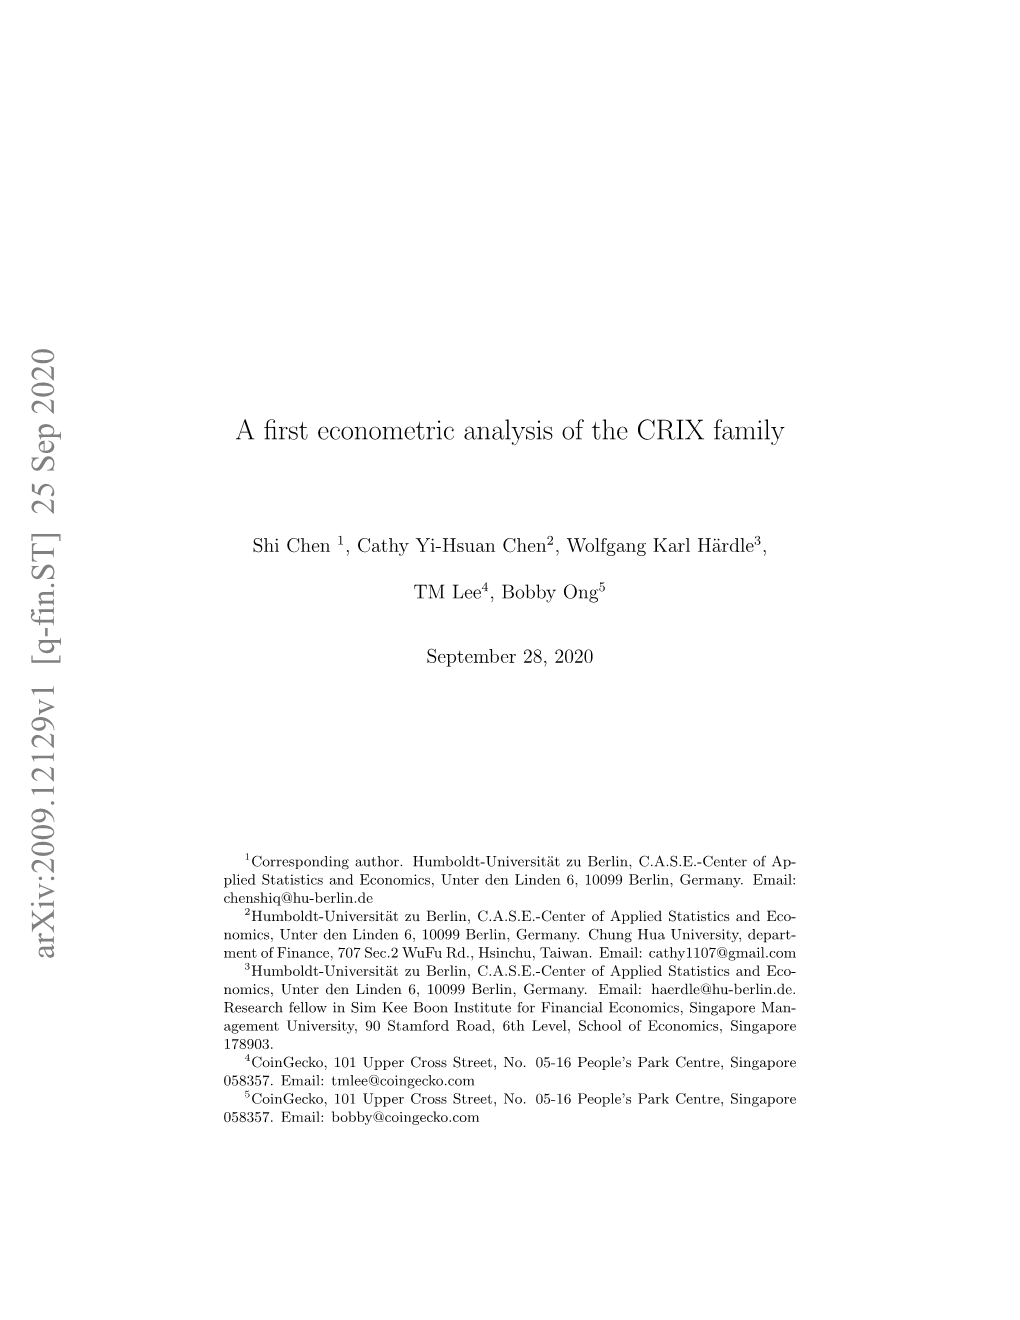 A First Econometric Analysis of the CRIX Family